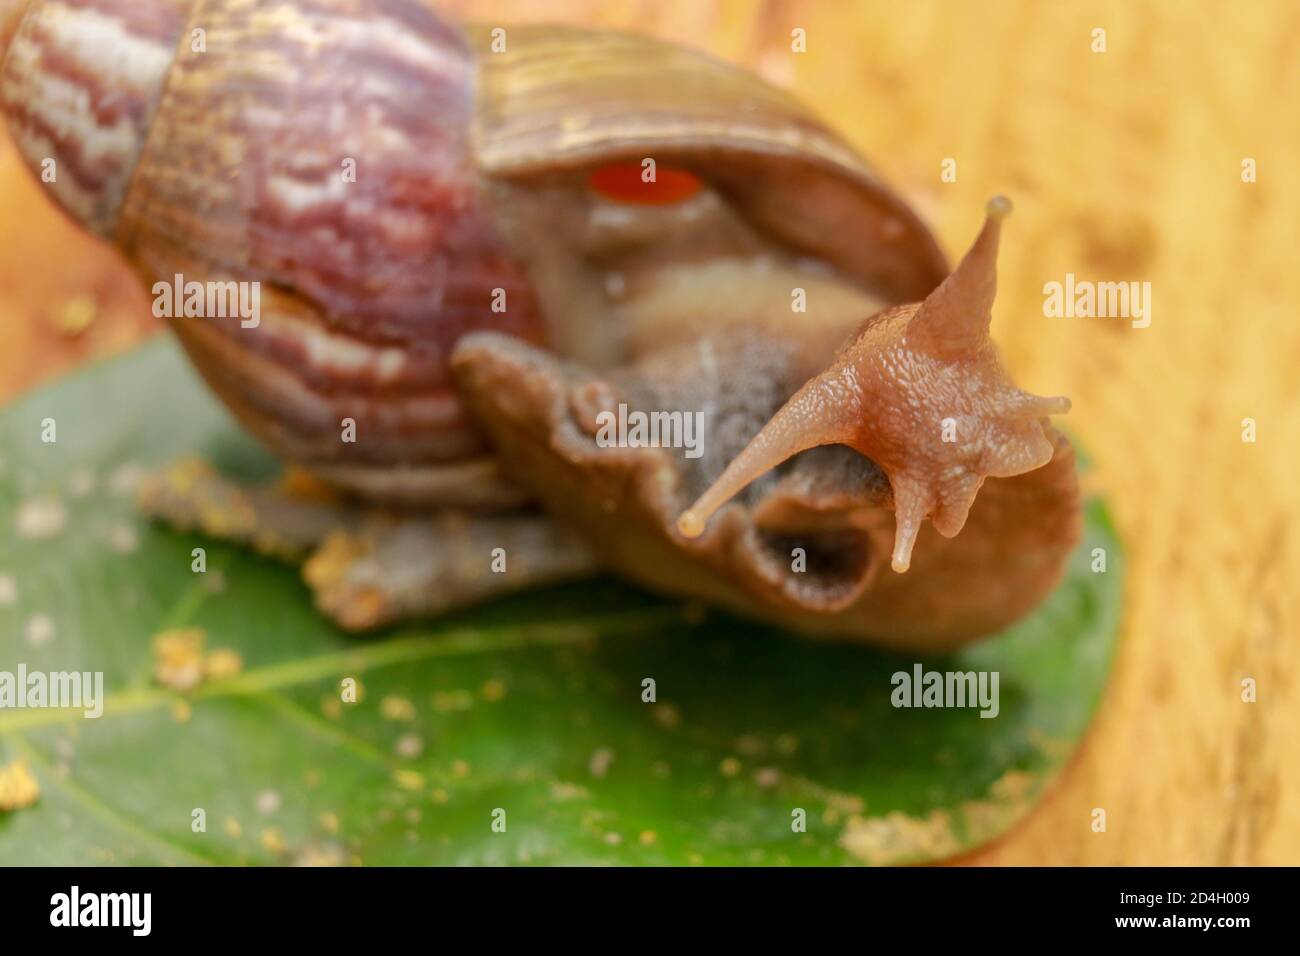 Giant African Land Snail - Achatina fulica large land snail in Achatinidae, similar to Achatina achatina and Archachatina marginata, pest issues, inva Stock Photo